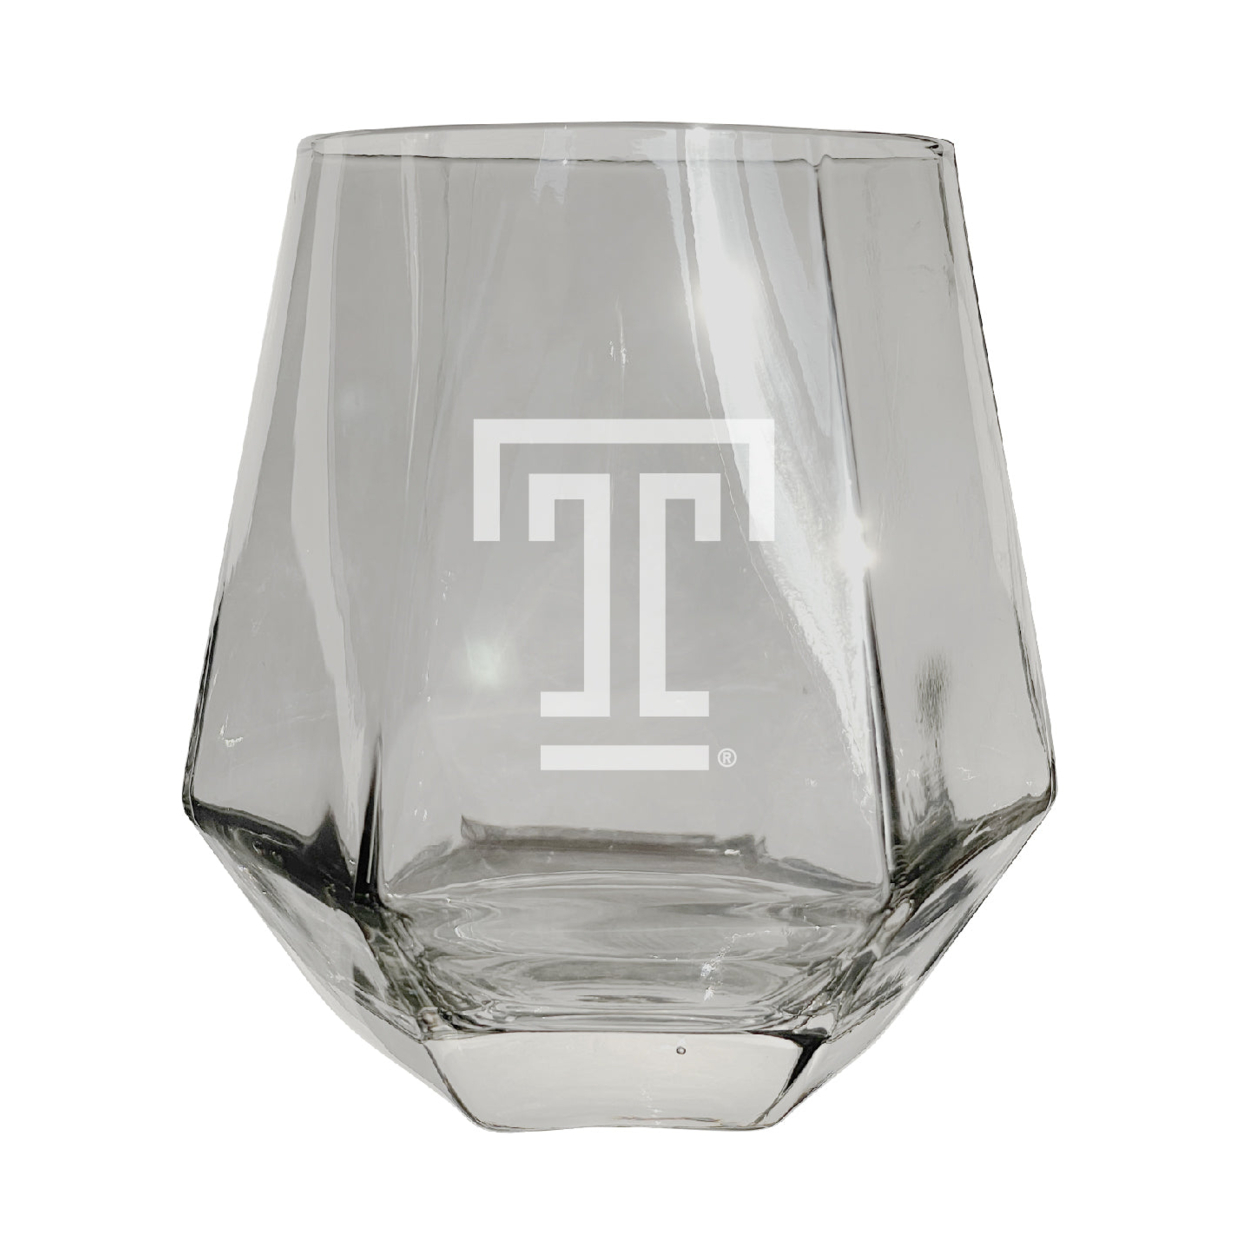 Temple University Etched Diamond Cut Stemless 10 Ounce Wine Glass Clear